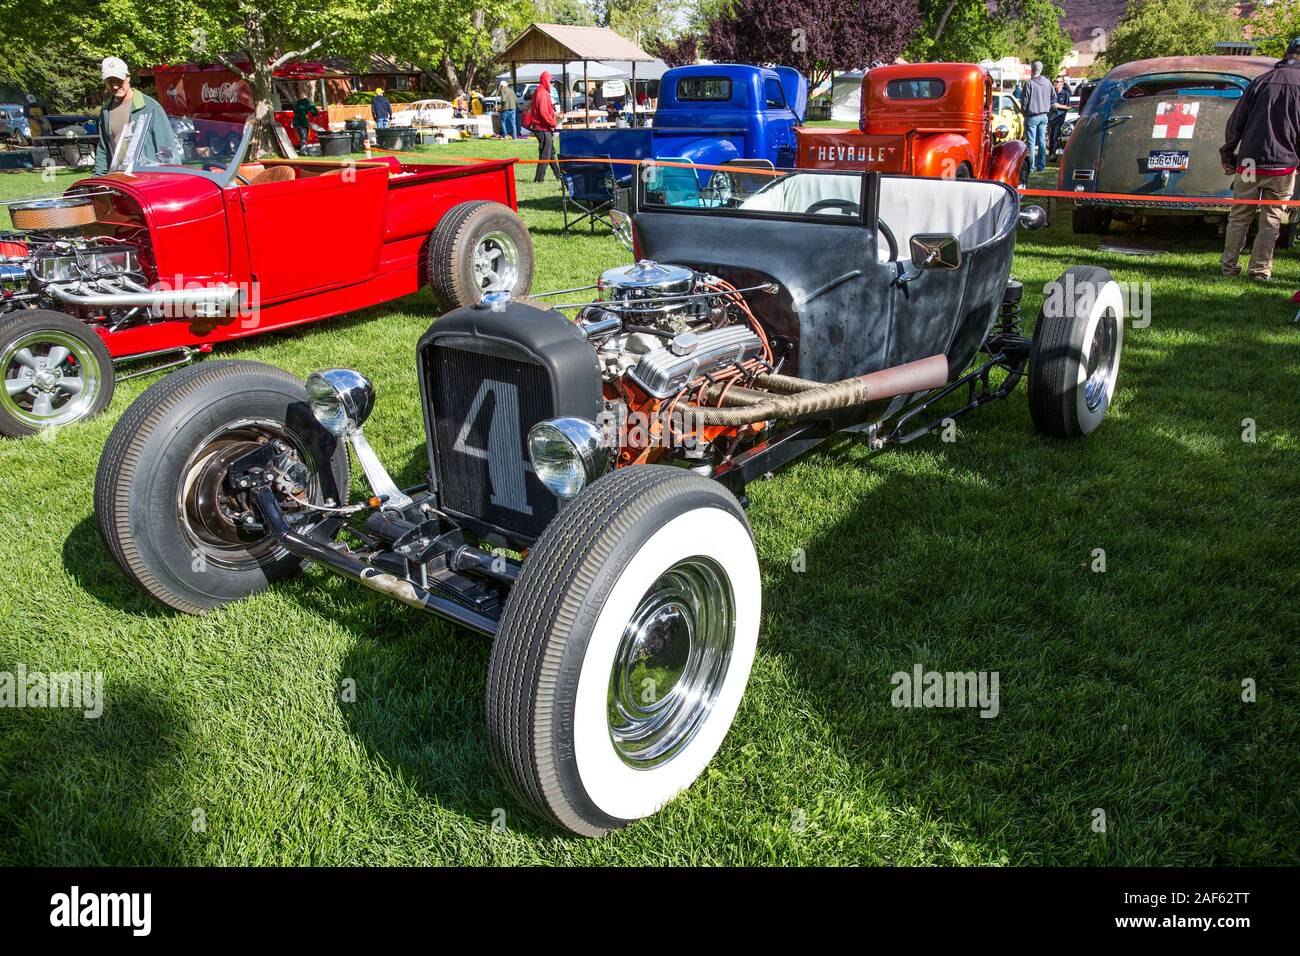 A bucket-T rat rod, built on a 1920 Ford Model T body and heavily modified and customized.  April Action Moab Car Show in Moab, Utah.  Rat rods are ge Stock Photo